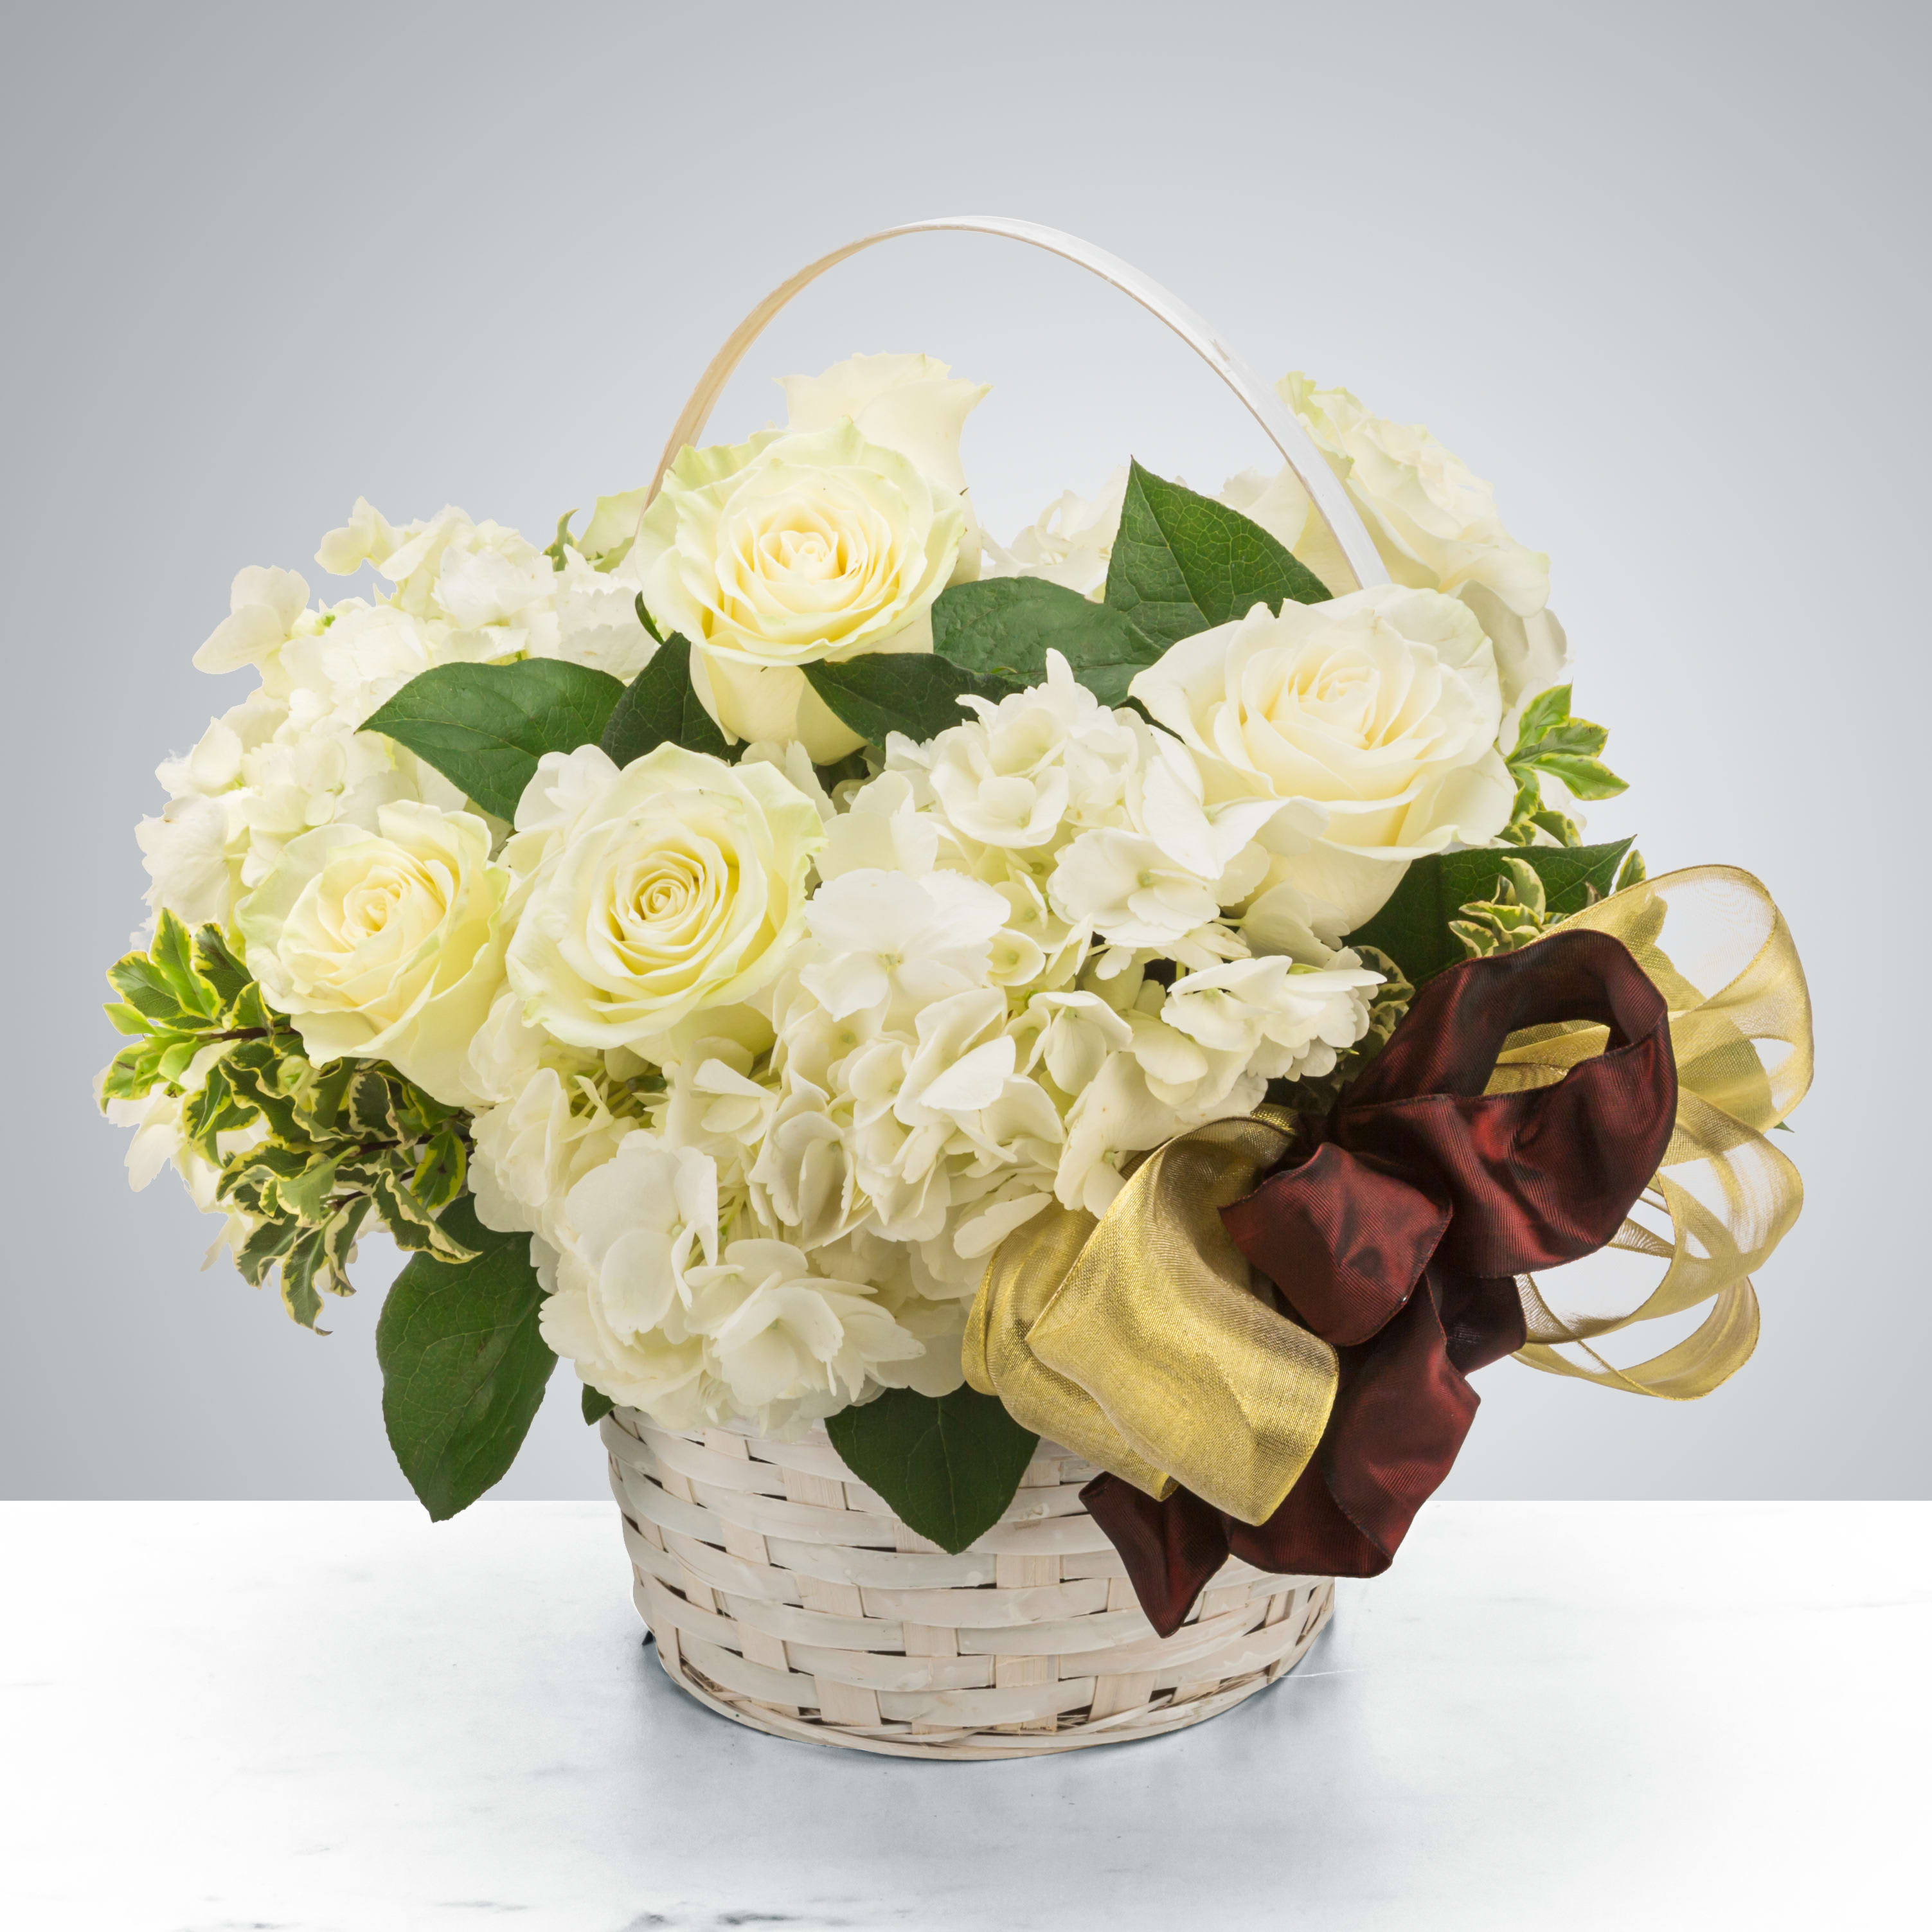 Snowglobe by BloomNation™ - White fluffy roses and hydrangeas sit in an all-white basket with a gold and maroon ribbon. Send this to celebrate the winter season! Perfect for all the winter holidays like New Year, Hanukkah, Kwanzaa, and Christmas.  Approximate Dimensions: 14&quot;D x 14&quot;H